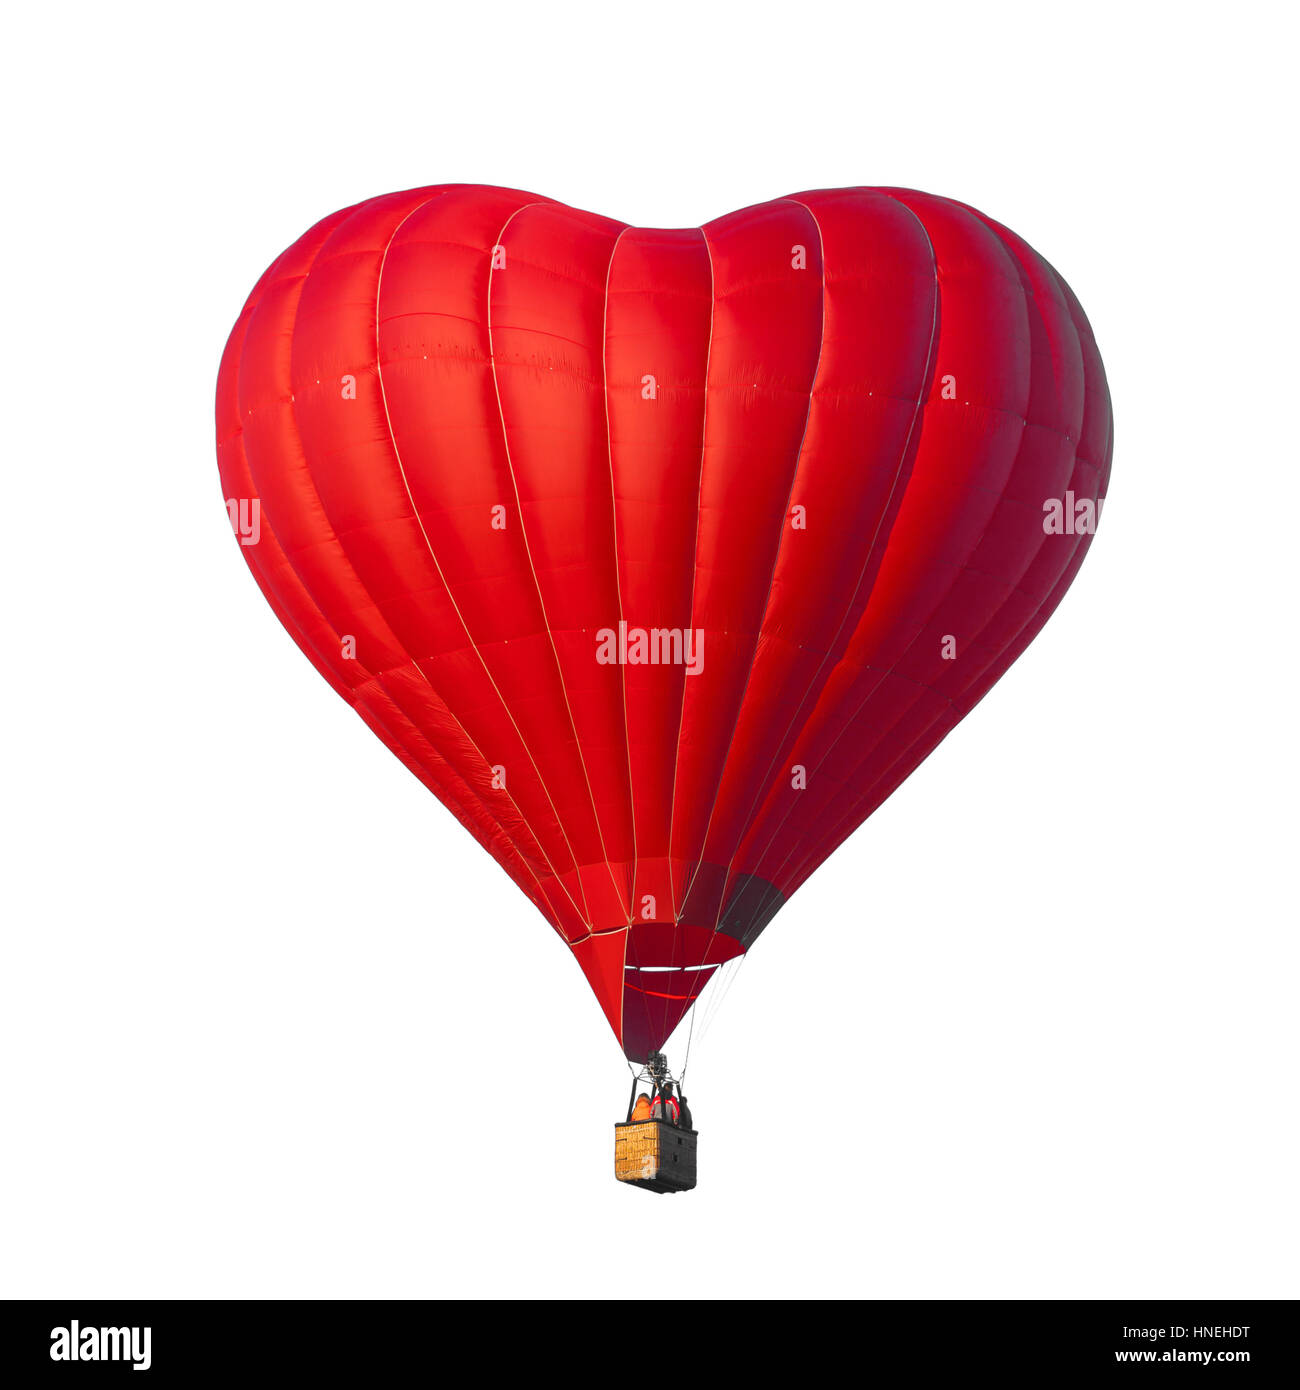 Red air balloon in the shape of a heart isolated on a white background Stock Photo